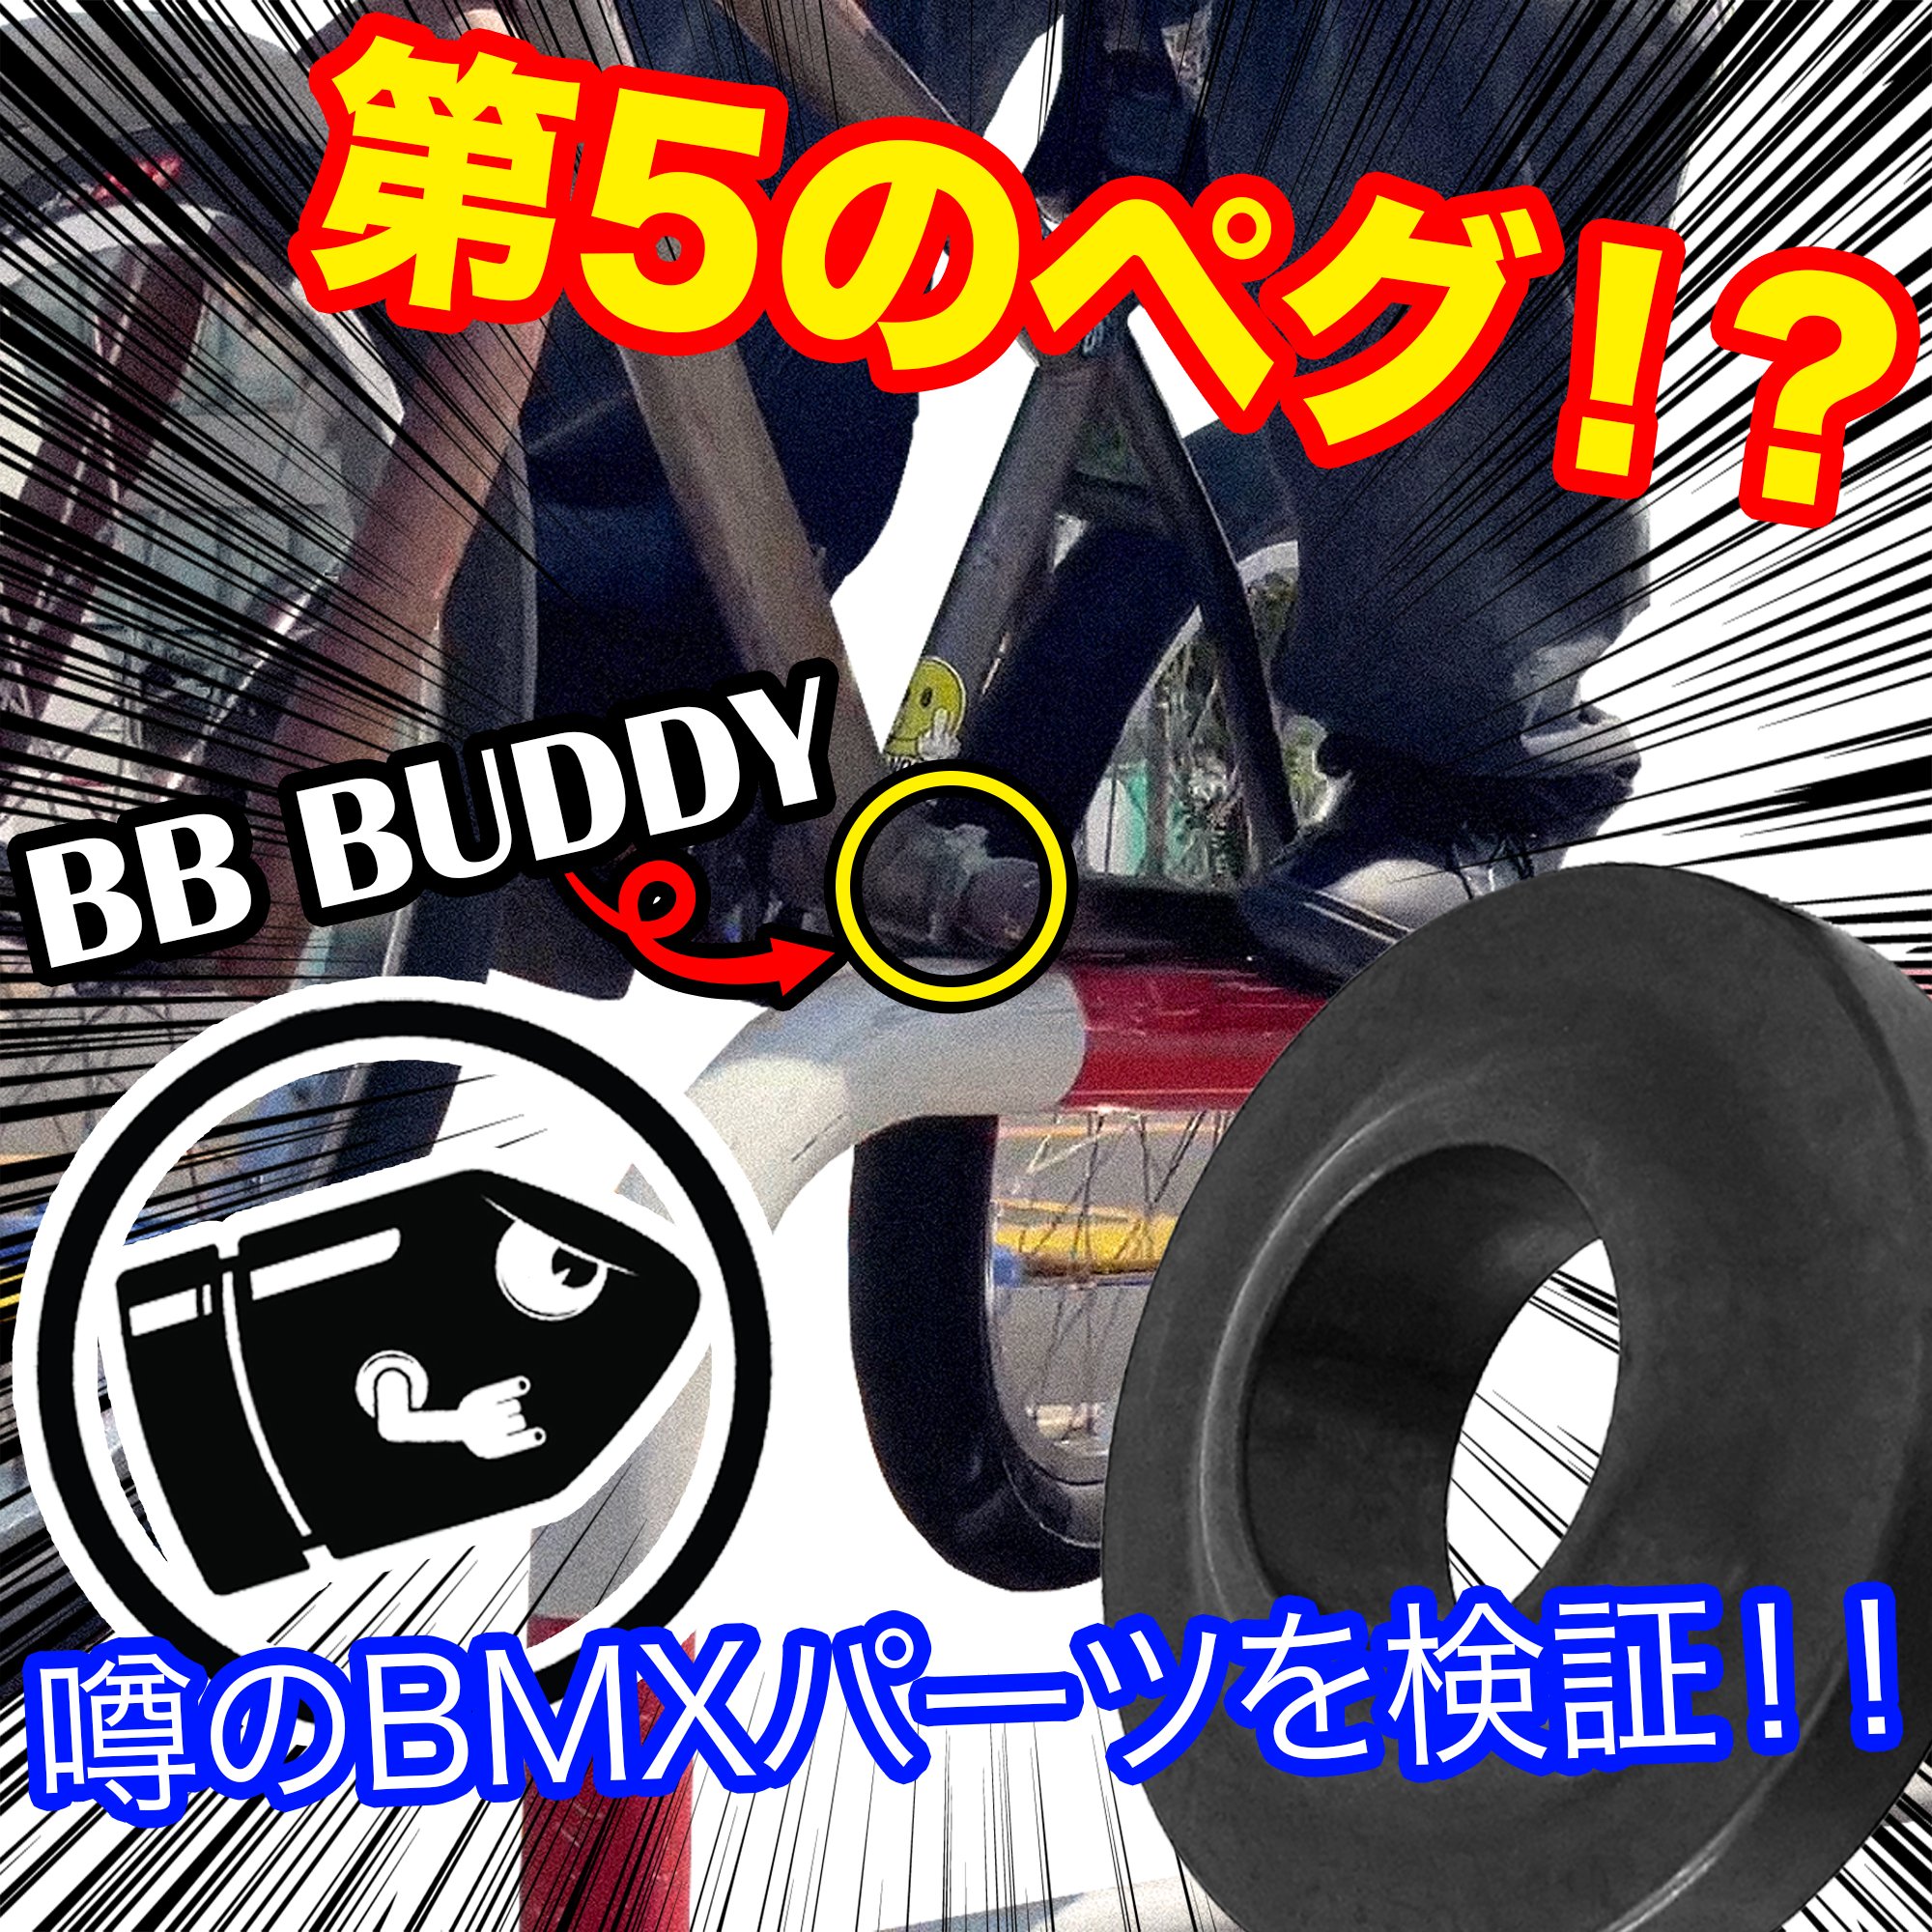 You are currently viewing 噂のBMXパーツを動画検証！第5のペグとは